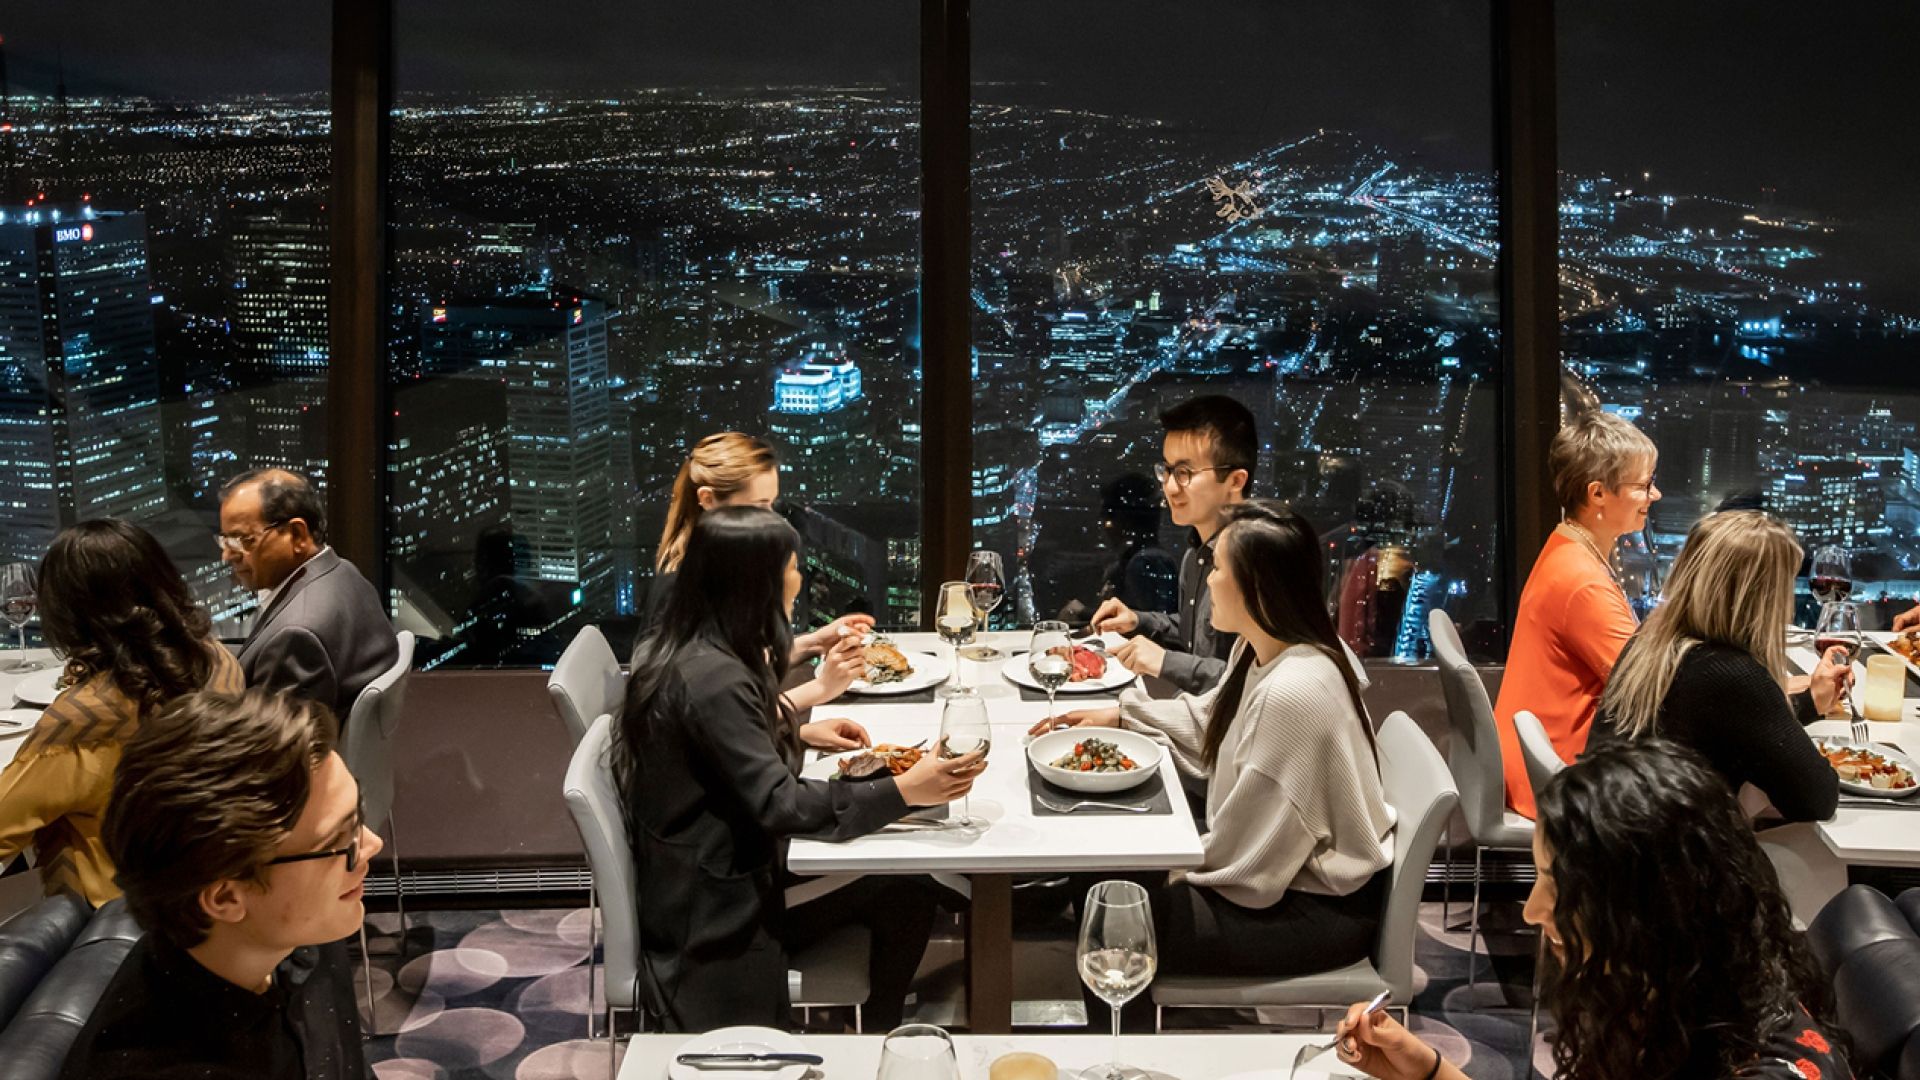 Several people seated at dining tables with the night time city lights in the background